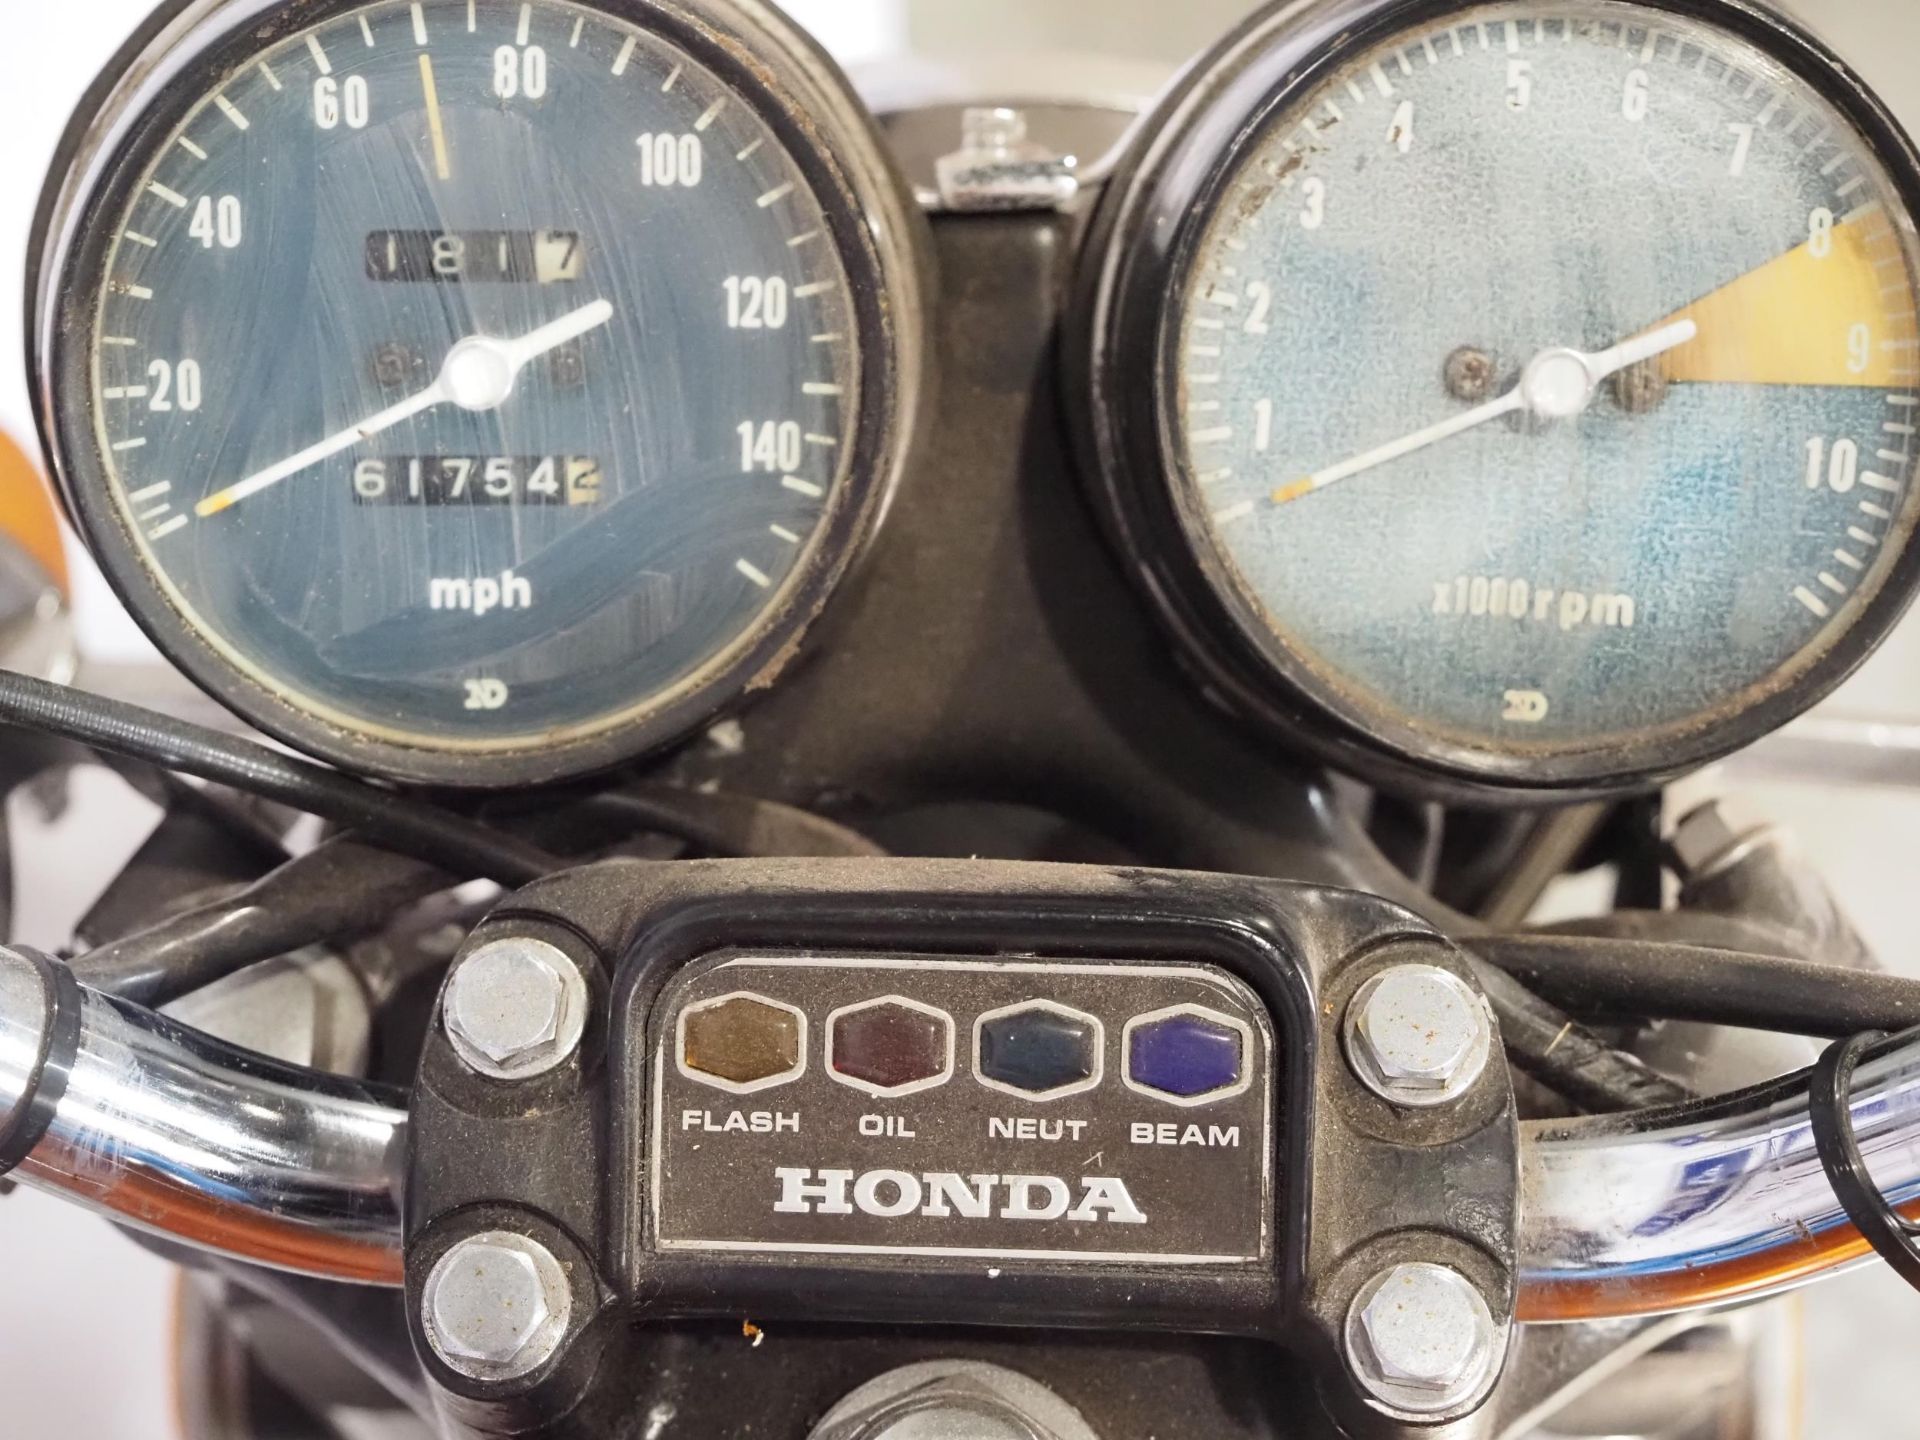 Honda 750 Four motorcycle. 1972. 736cc. Frame No. 2024351 Engine No. 2031888 Engine turns over but - Image 6 of 7